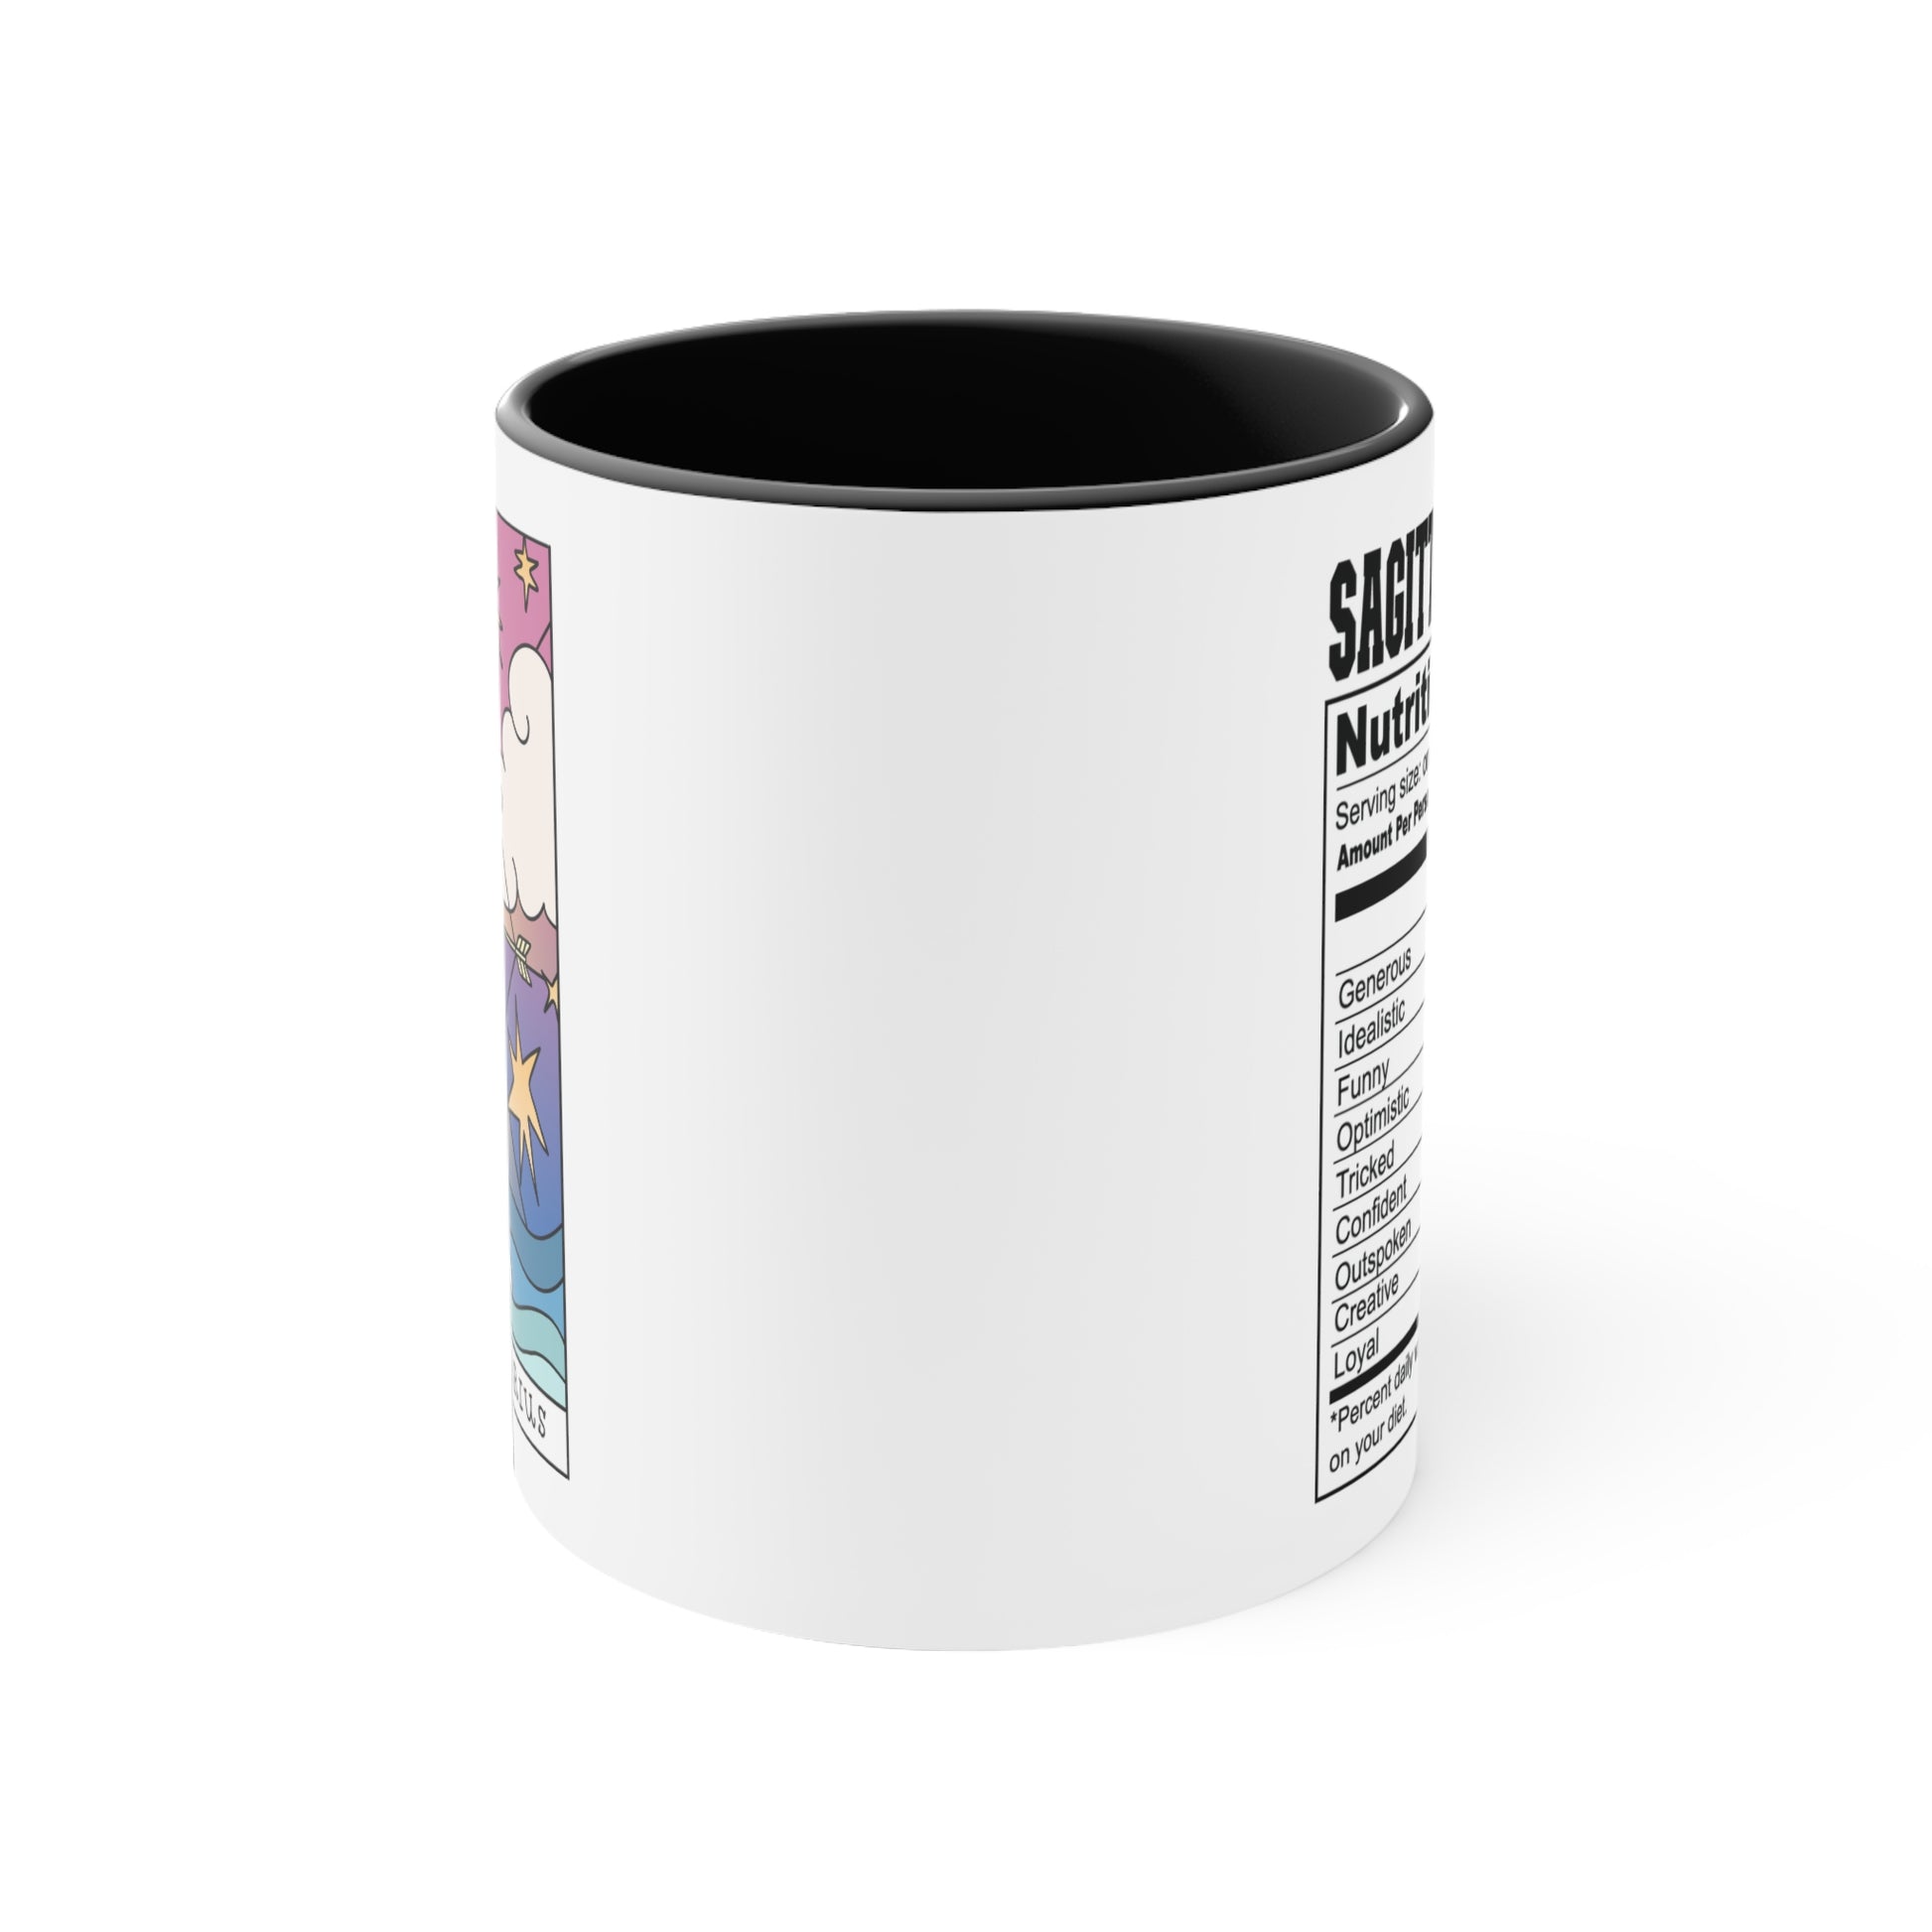 This listing is for a Premium Quality 11oz Black Accent White Ceramic coffee / tea mug with a double sided Sagittarius Tarot Card